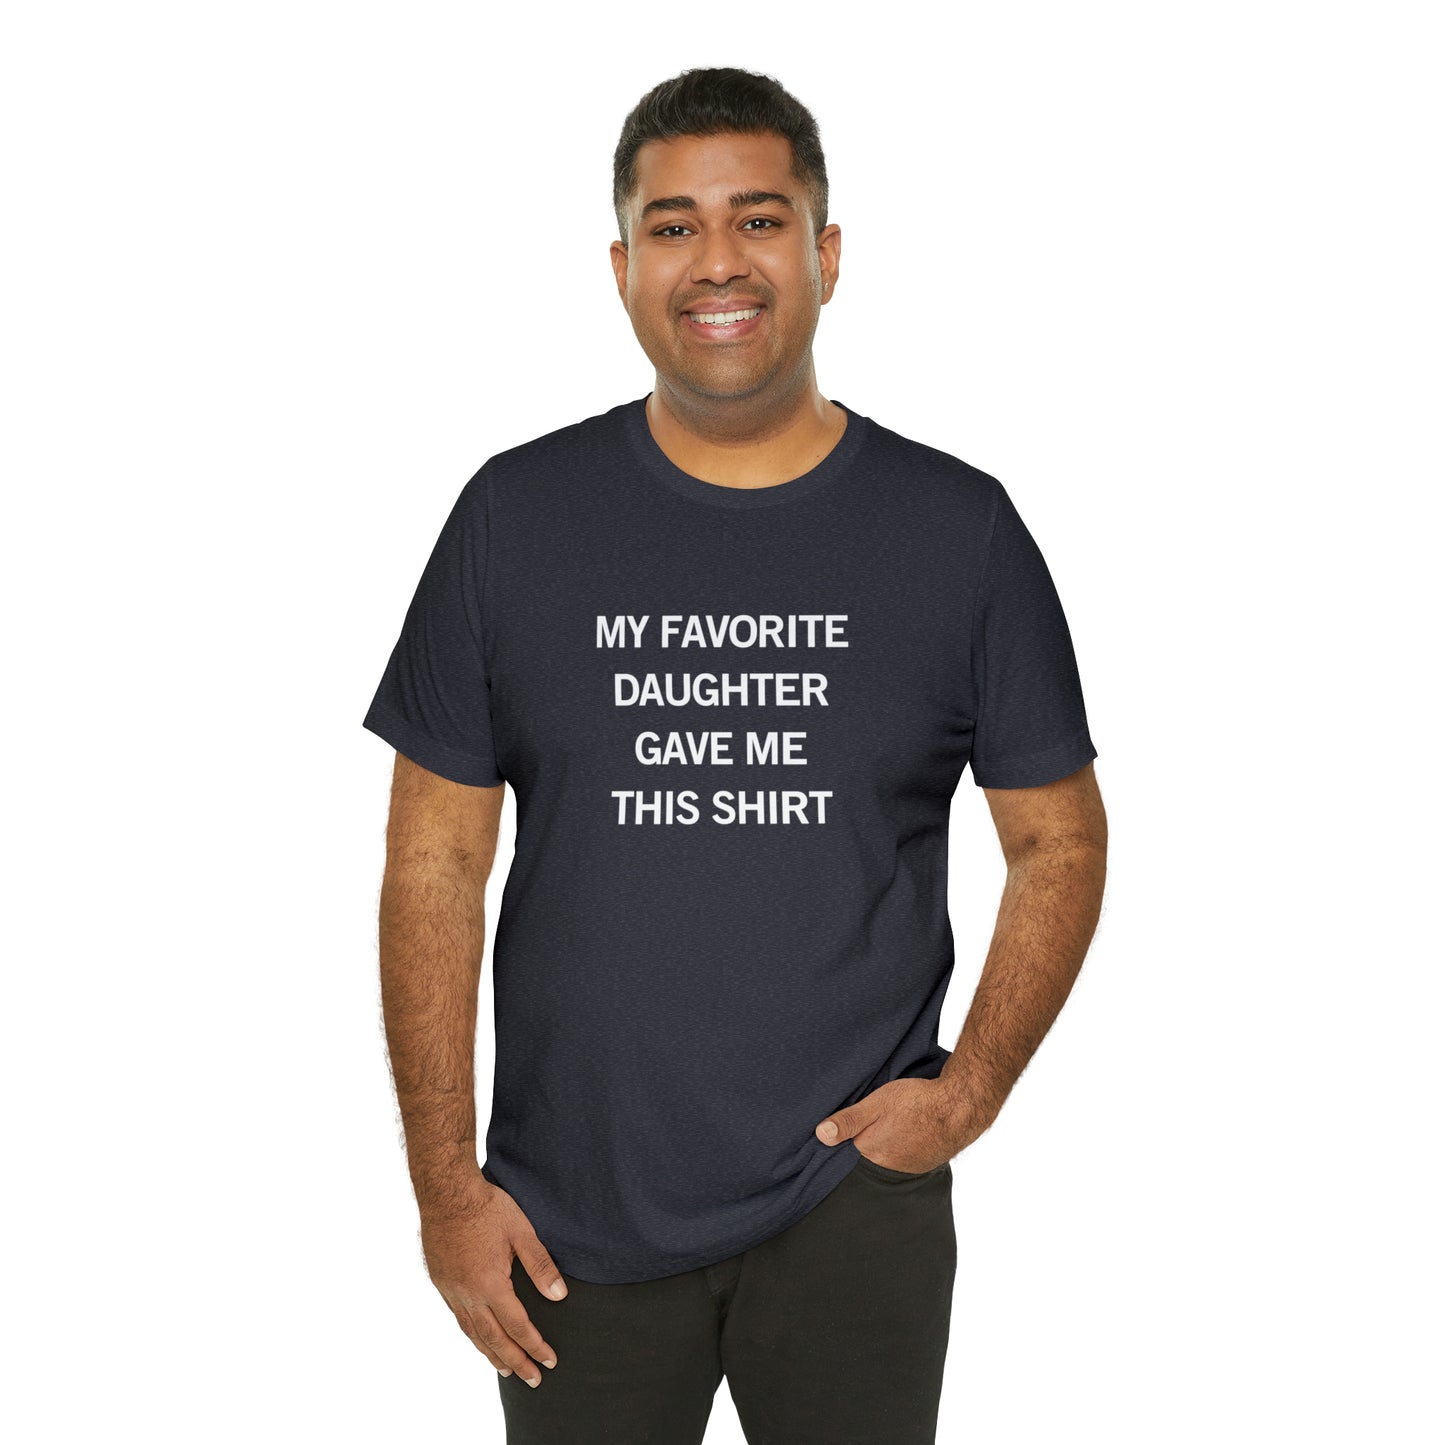 My Favorite Daughter | Unisex Tee for Dad